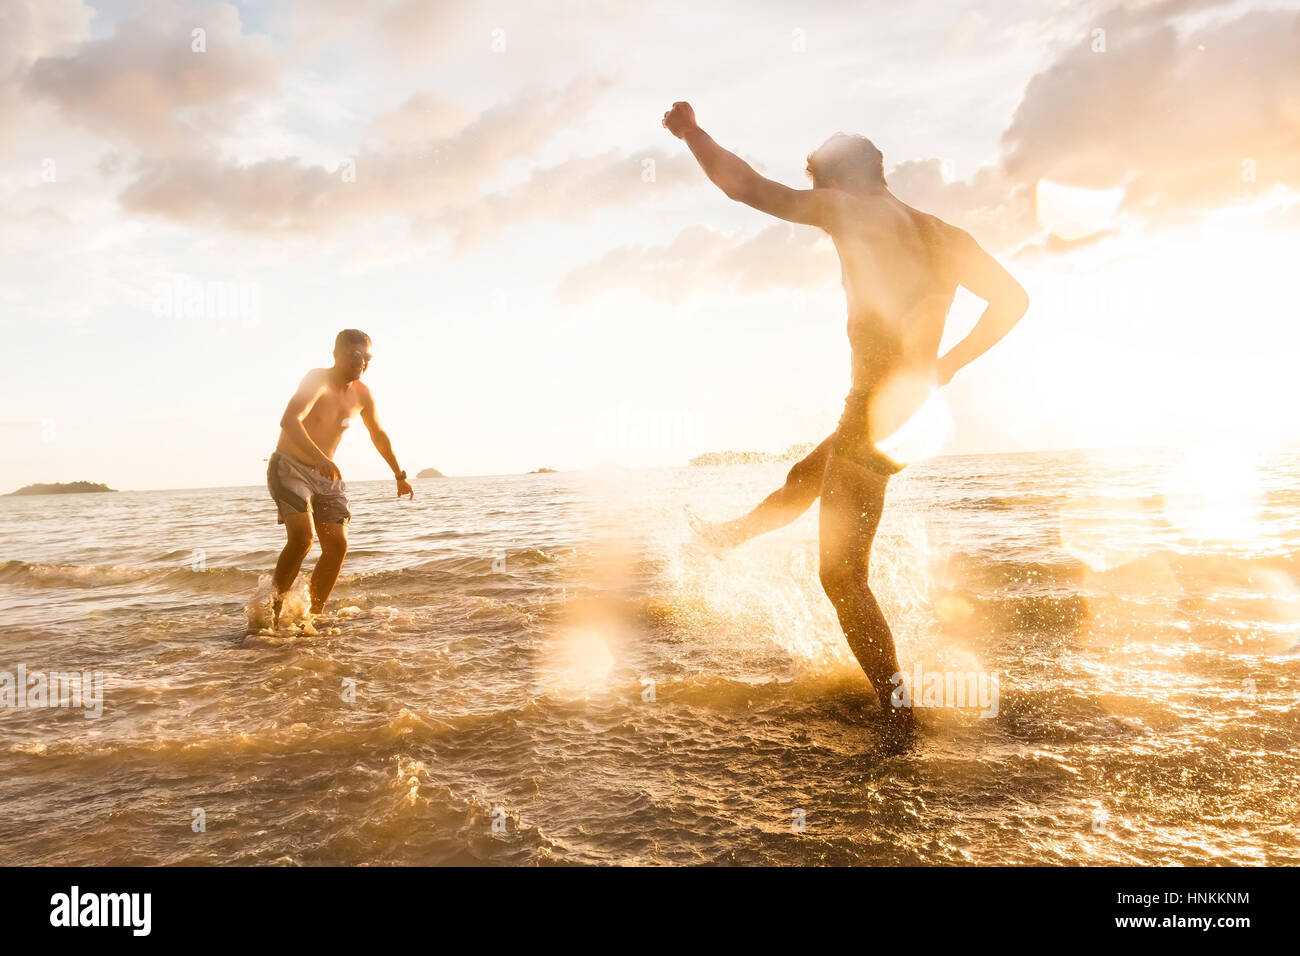 Two people having fun fighting with water splash in the sea with summer sunset, droplets effect and tilted photo to show action Stock Photo